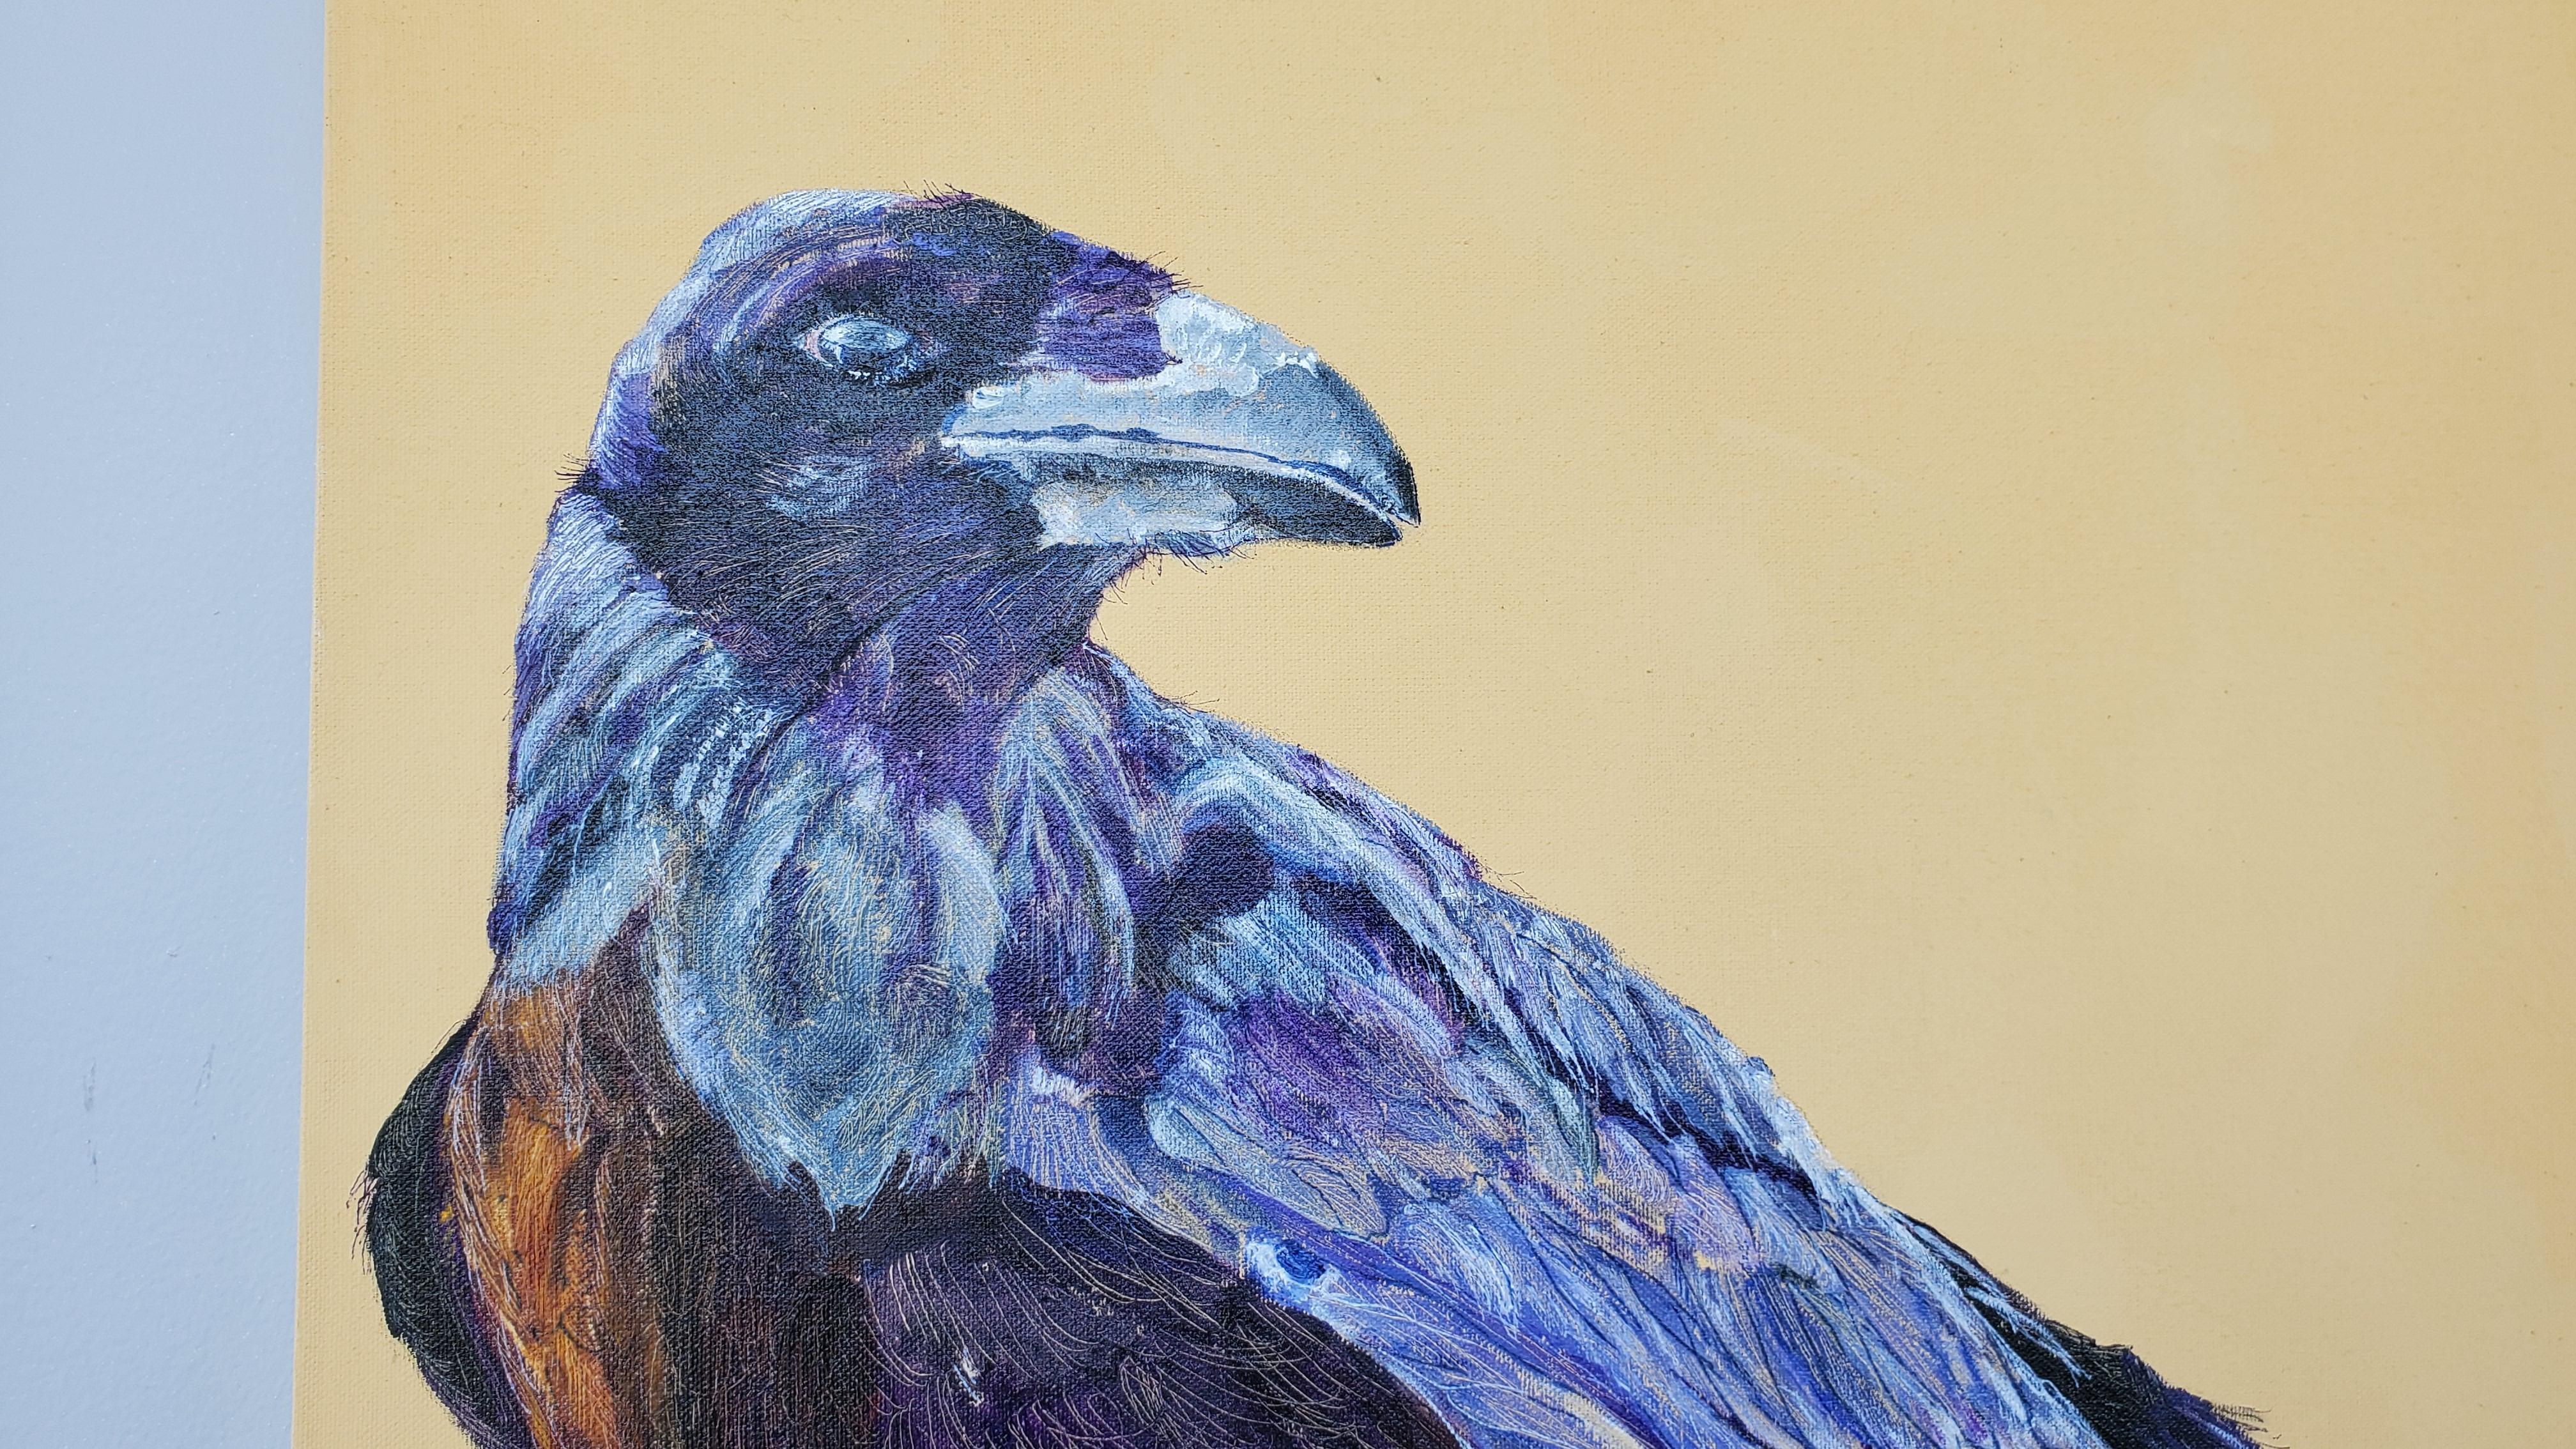 Avian Fables: Raven and Beach Ball 2 - acrylic and ink on canvas - Painting by Alison Keenan